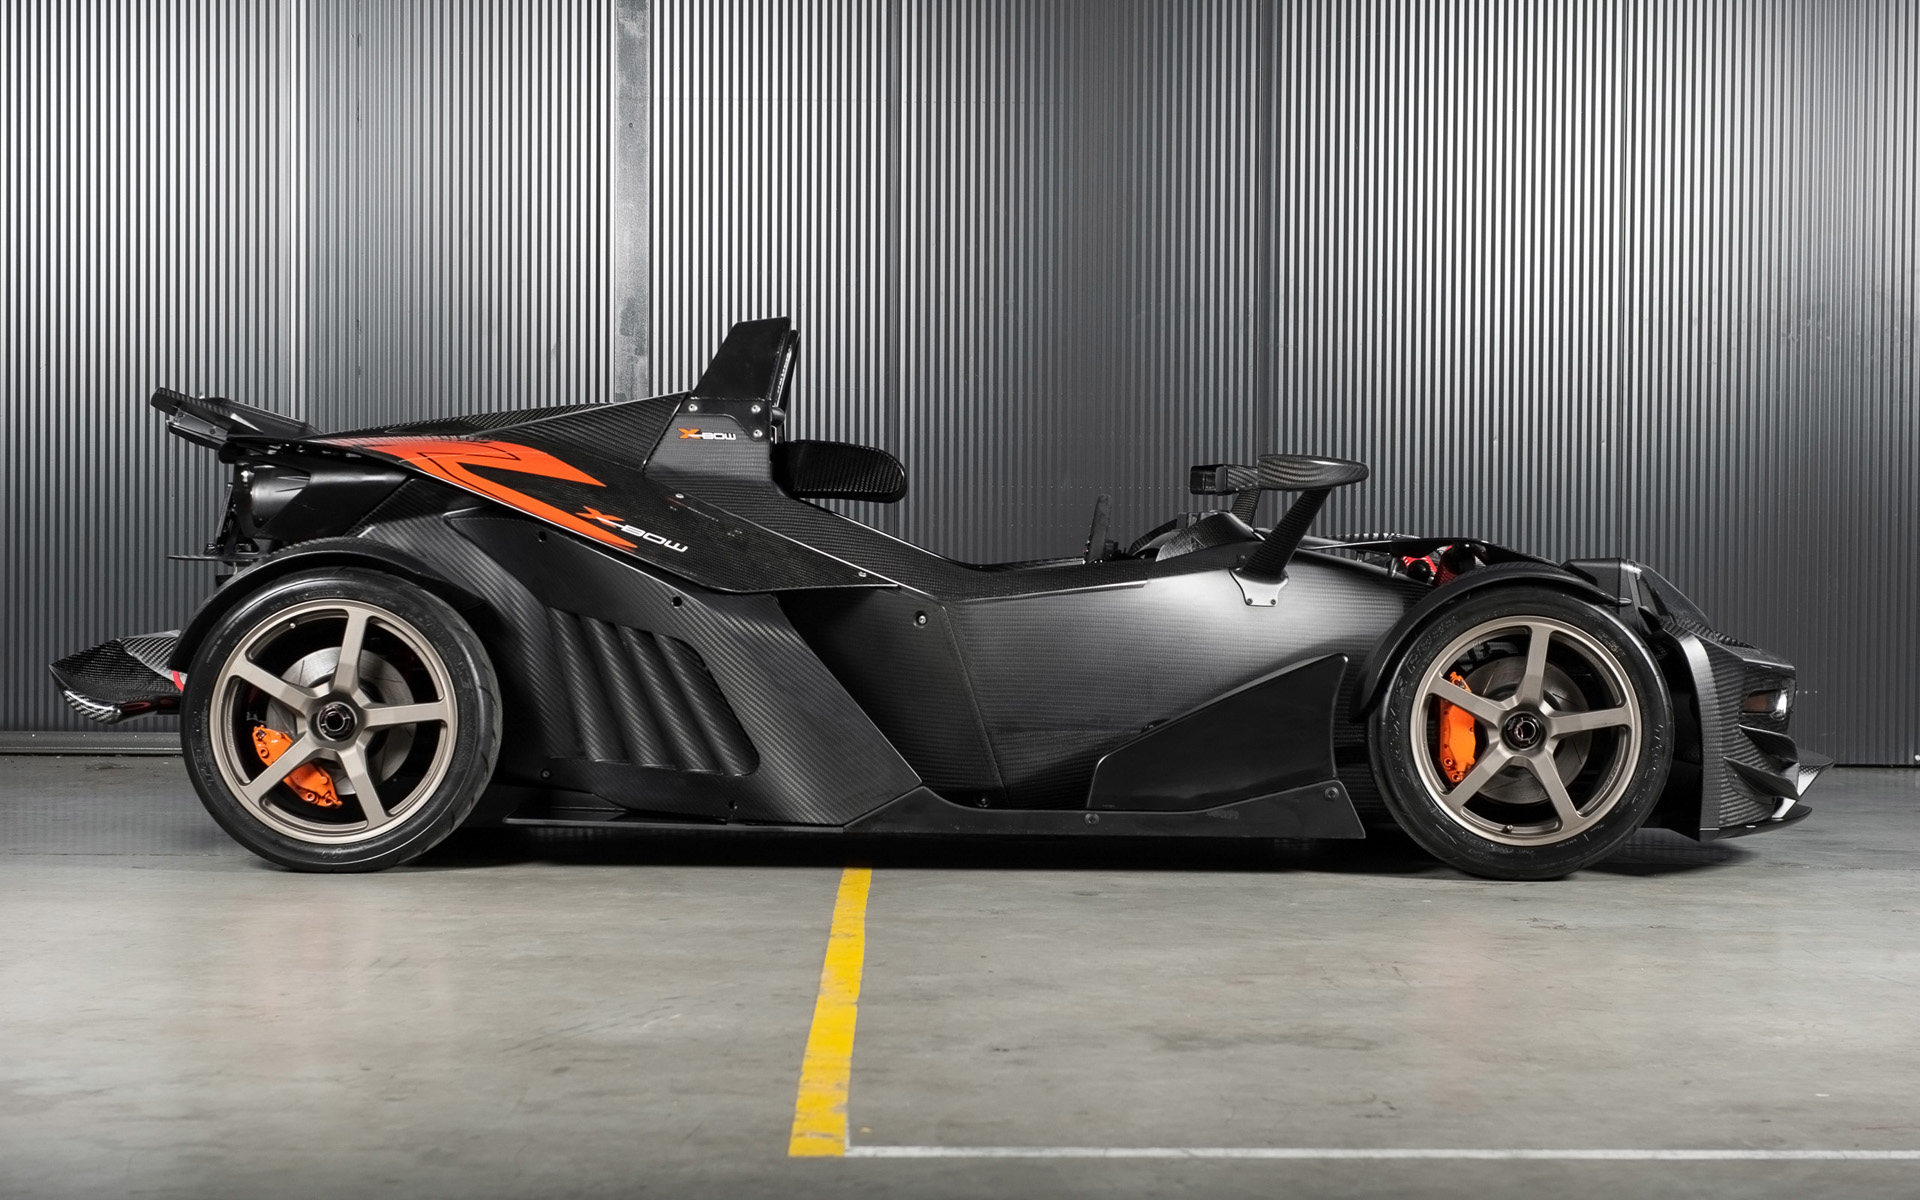 Ktm X-Bow Wallpapers